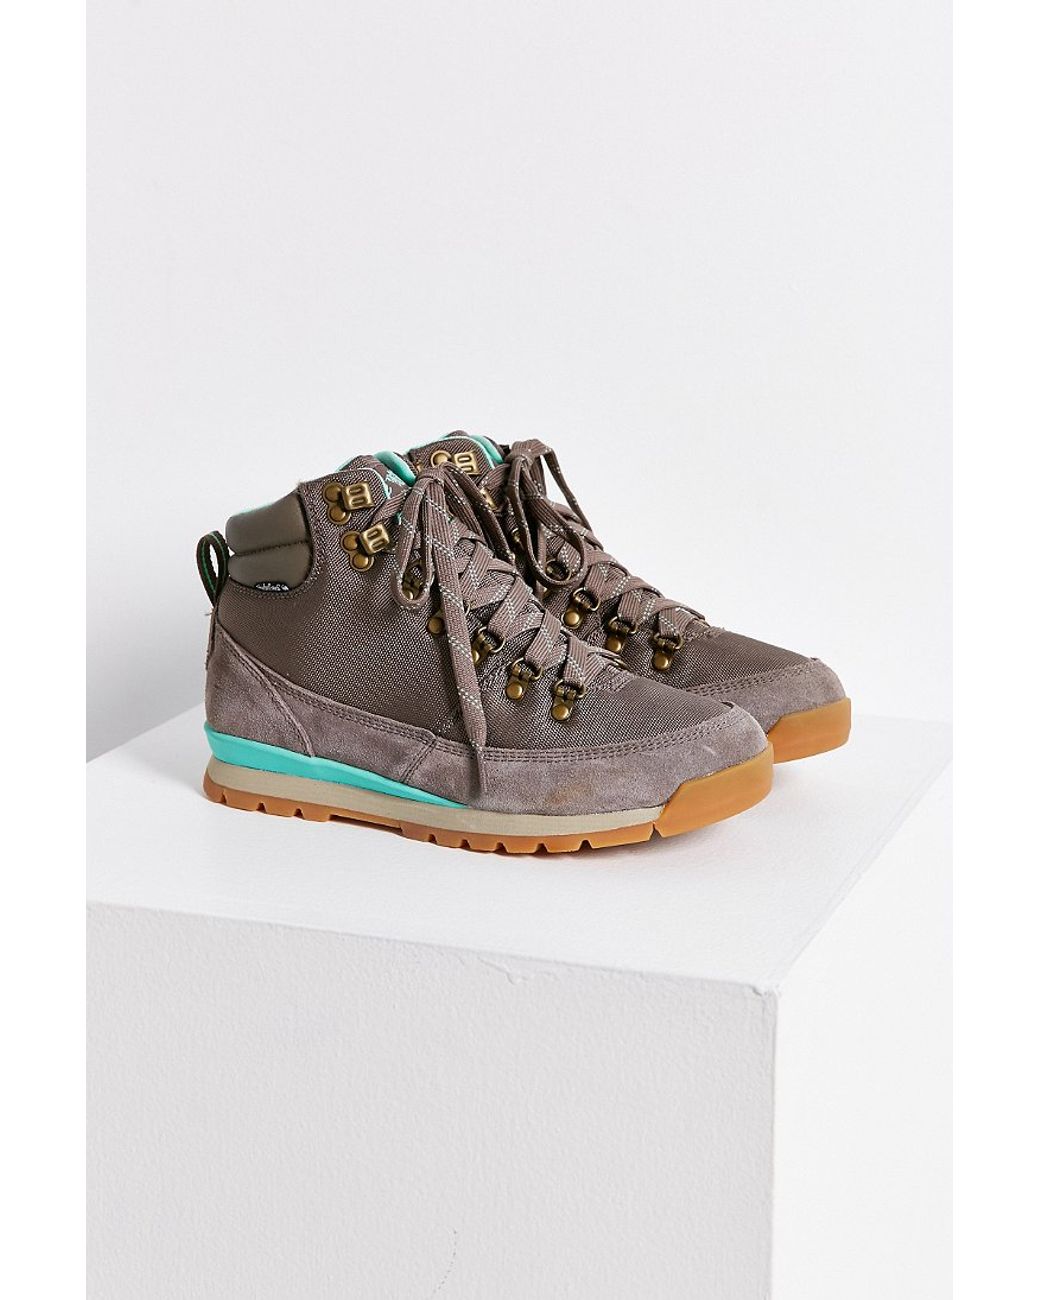 The North Face Back To Berkeley Redux Hiker Boot in Brown | Lyst